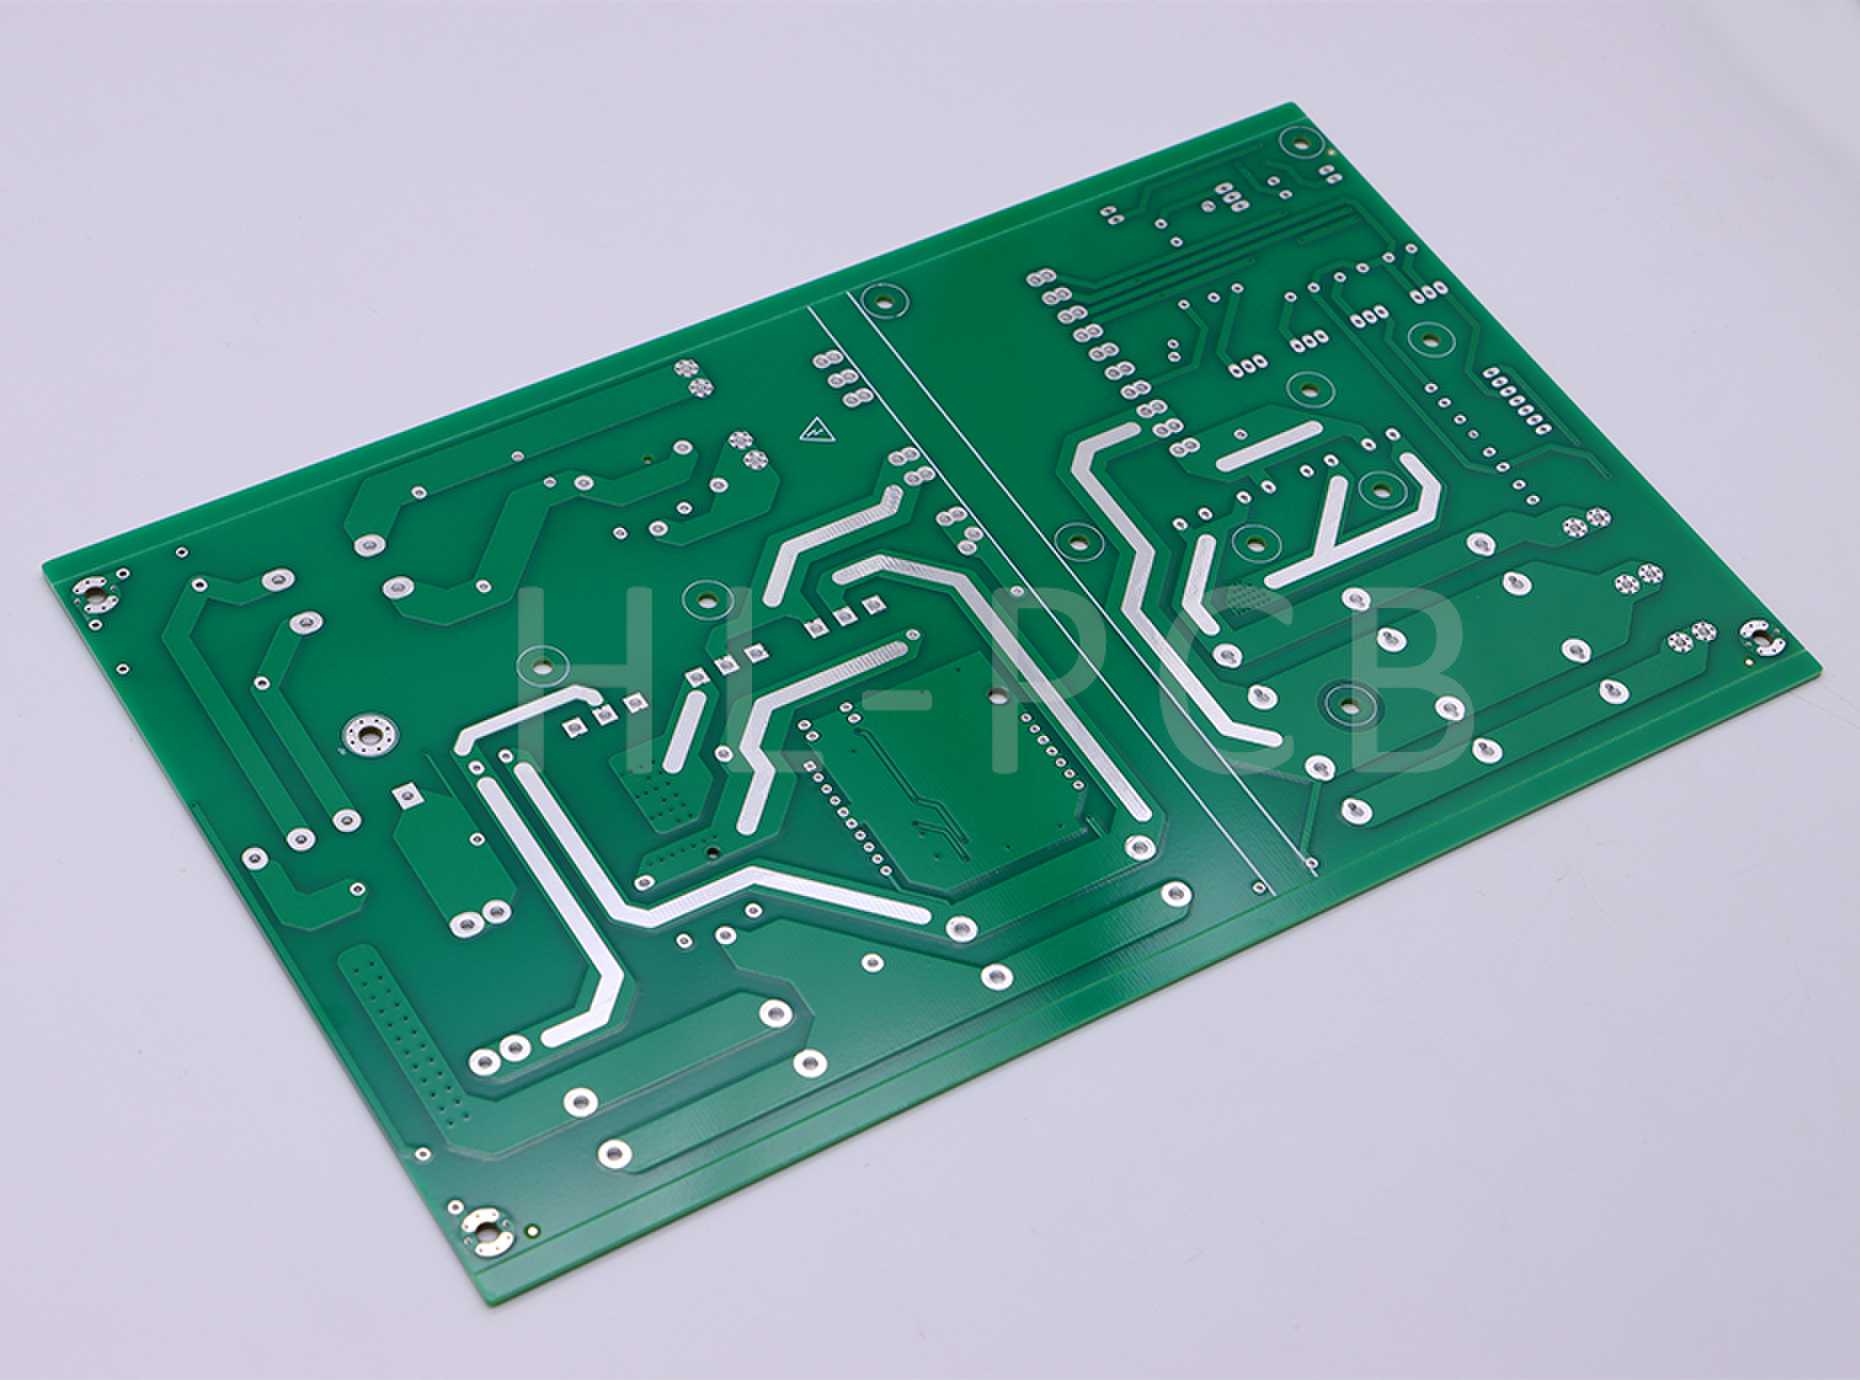 Six ways to prevent PCB warping